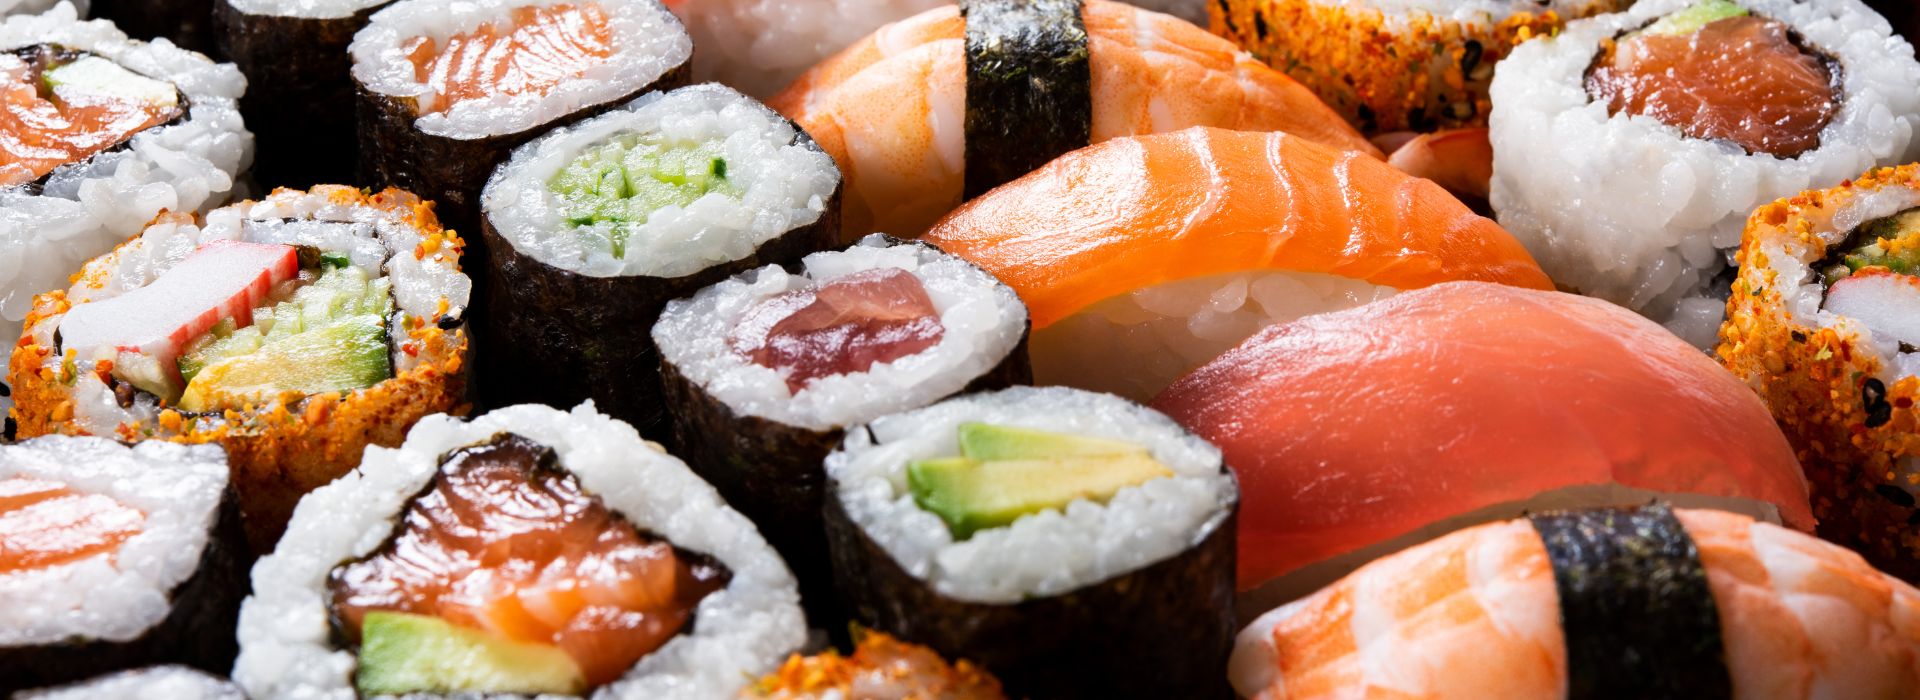 different kinds of sushi rolls with rice and seaweed